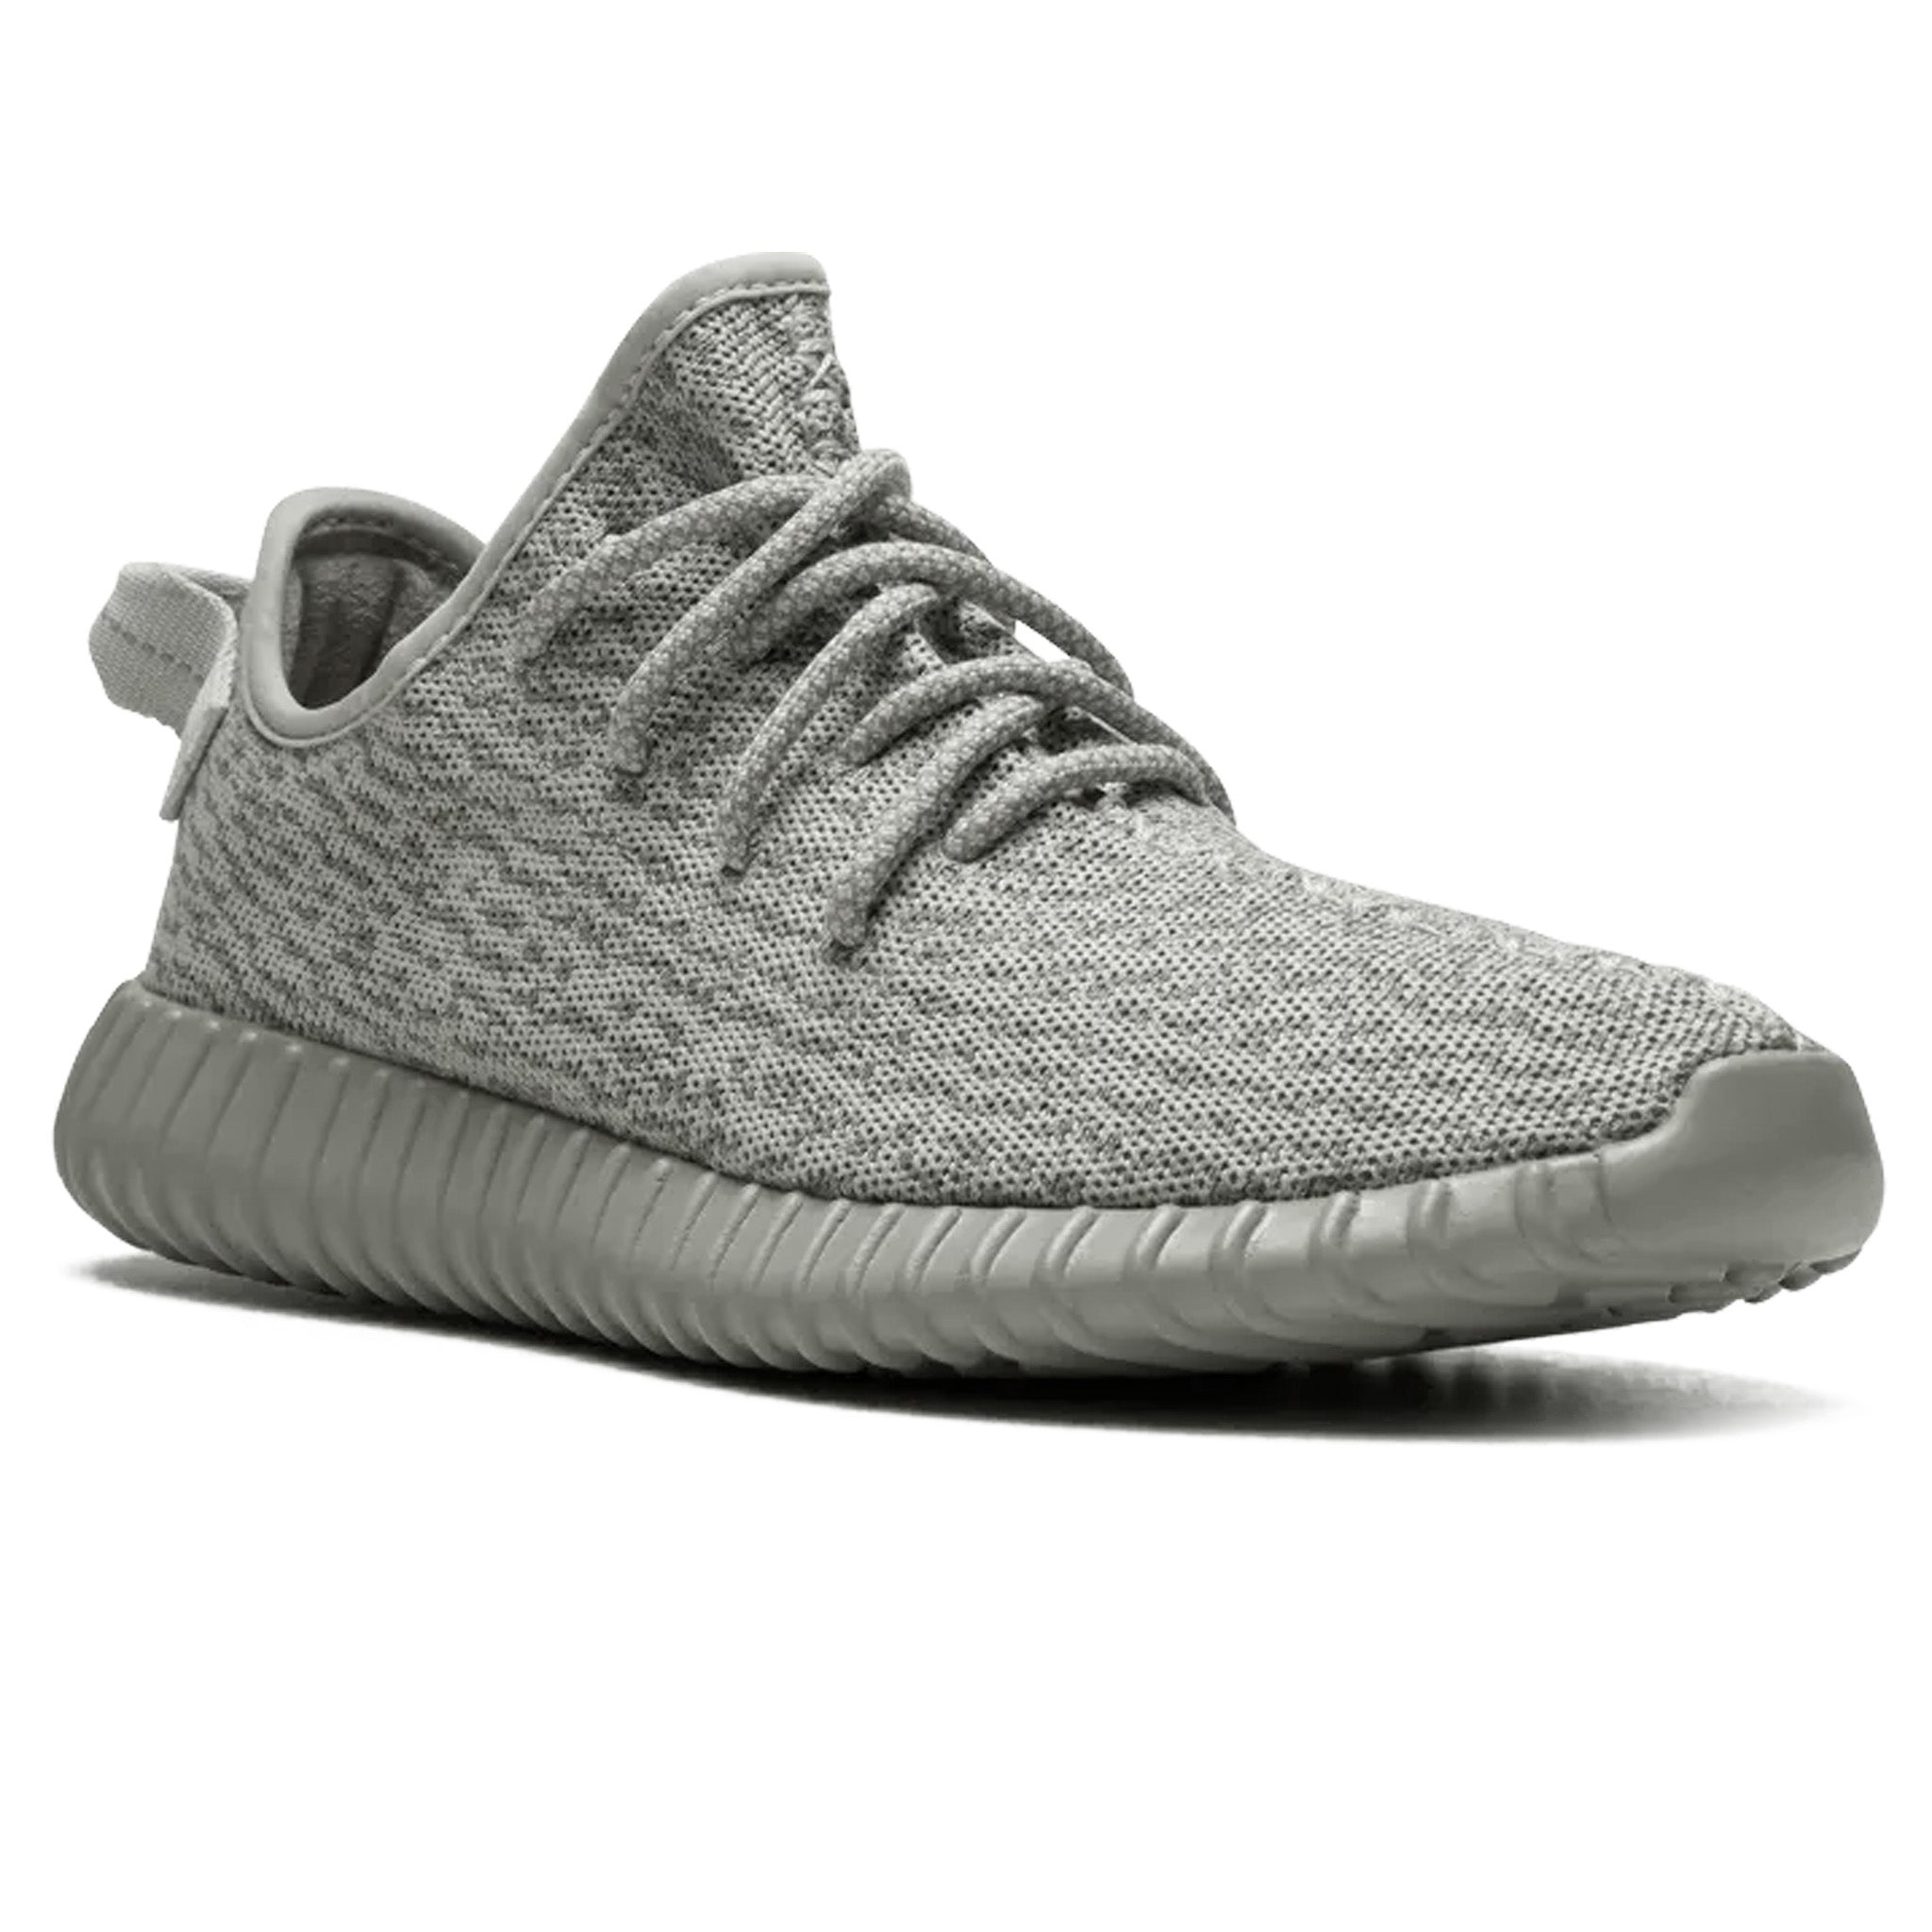 Front view of Adidas Yeezy Boost 350 V1 Moonrock AQ2660